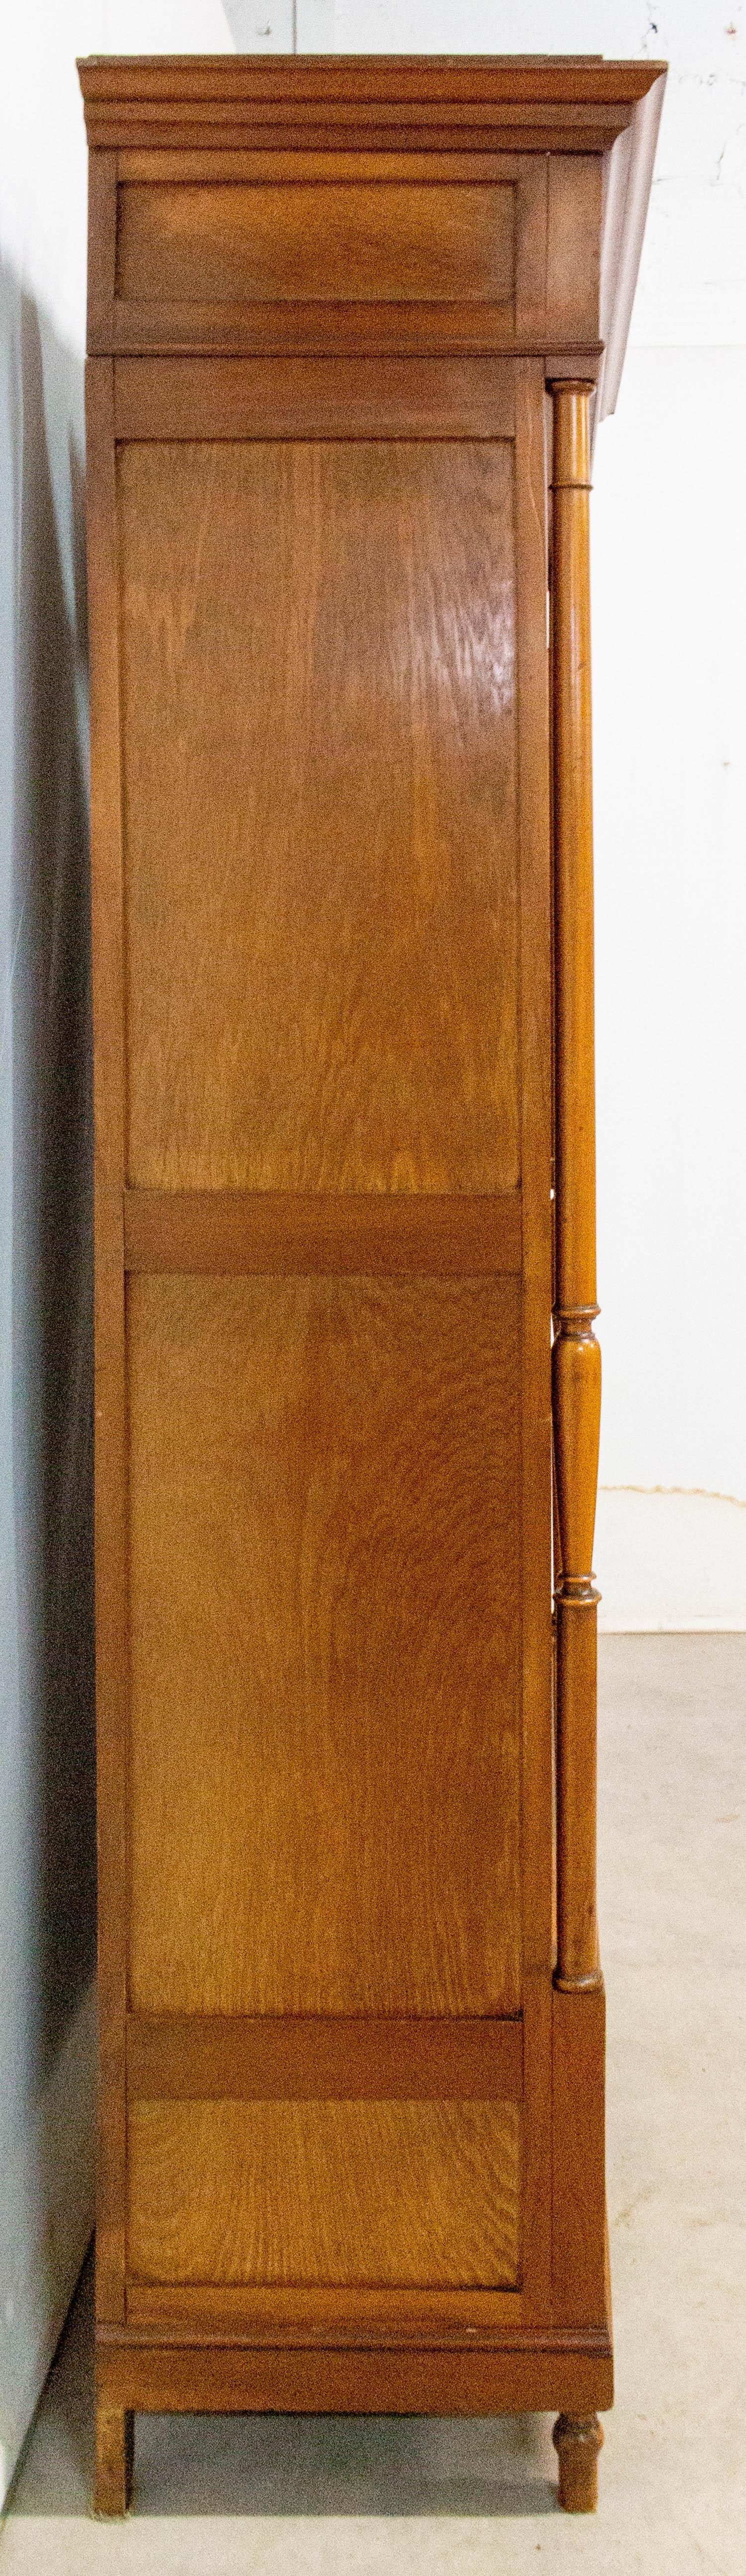 armoire with mirror